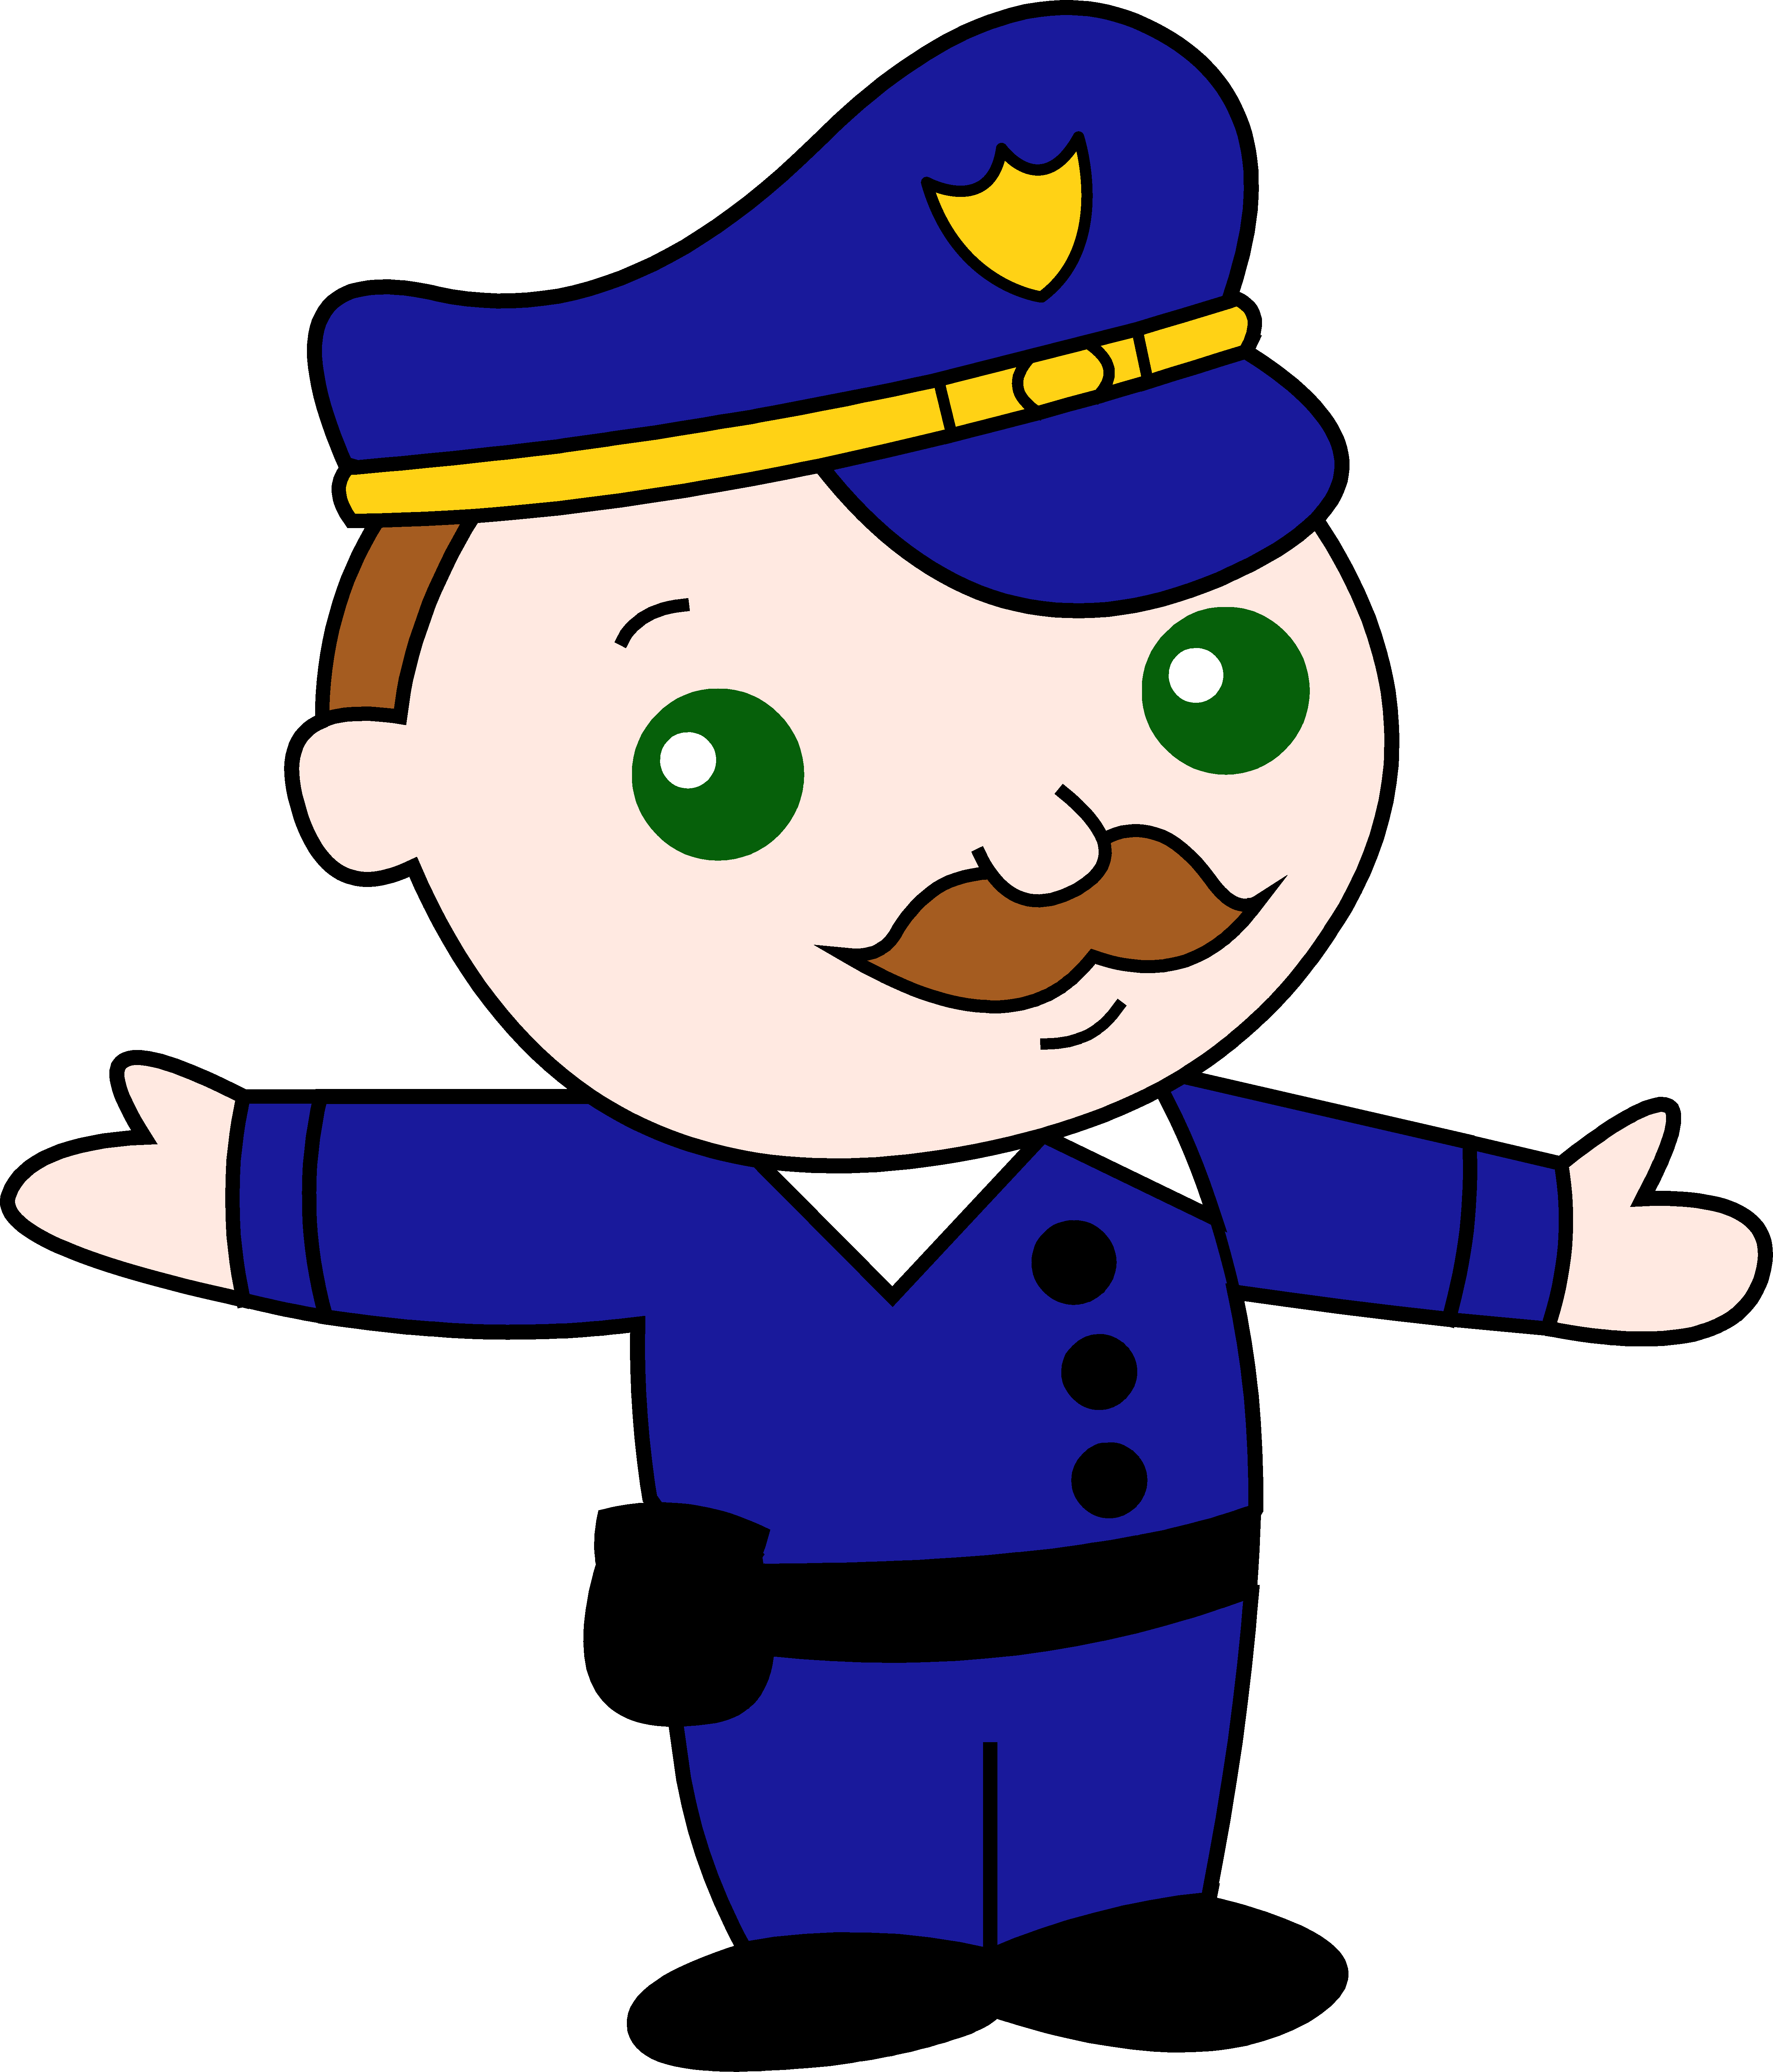 Police clipart career. Cop 